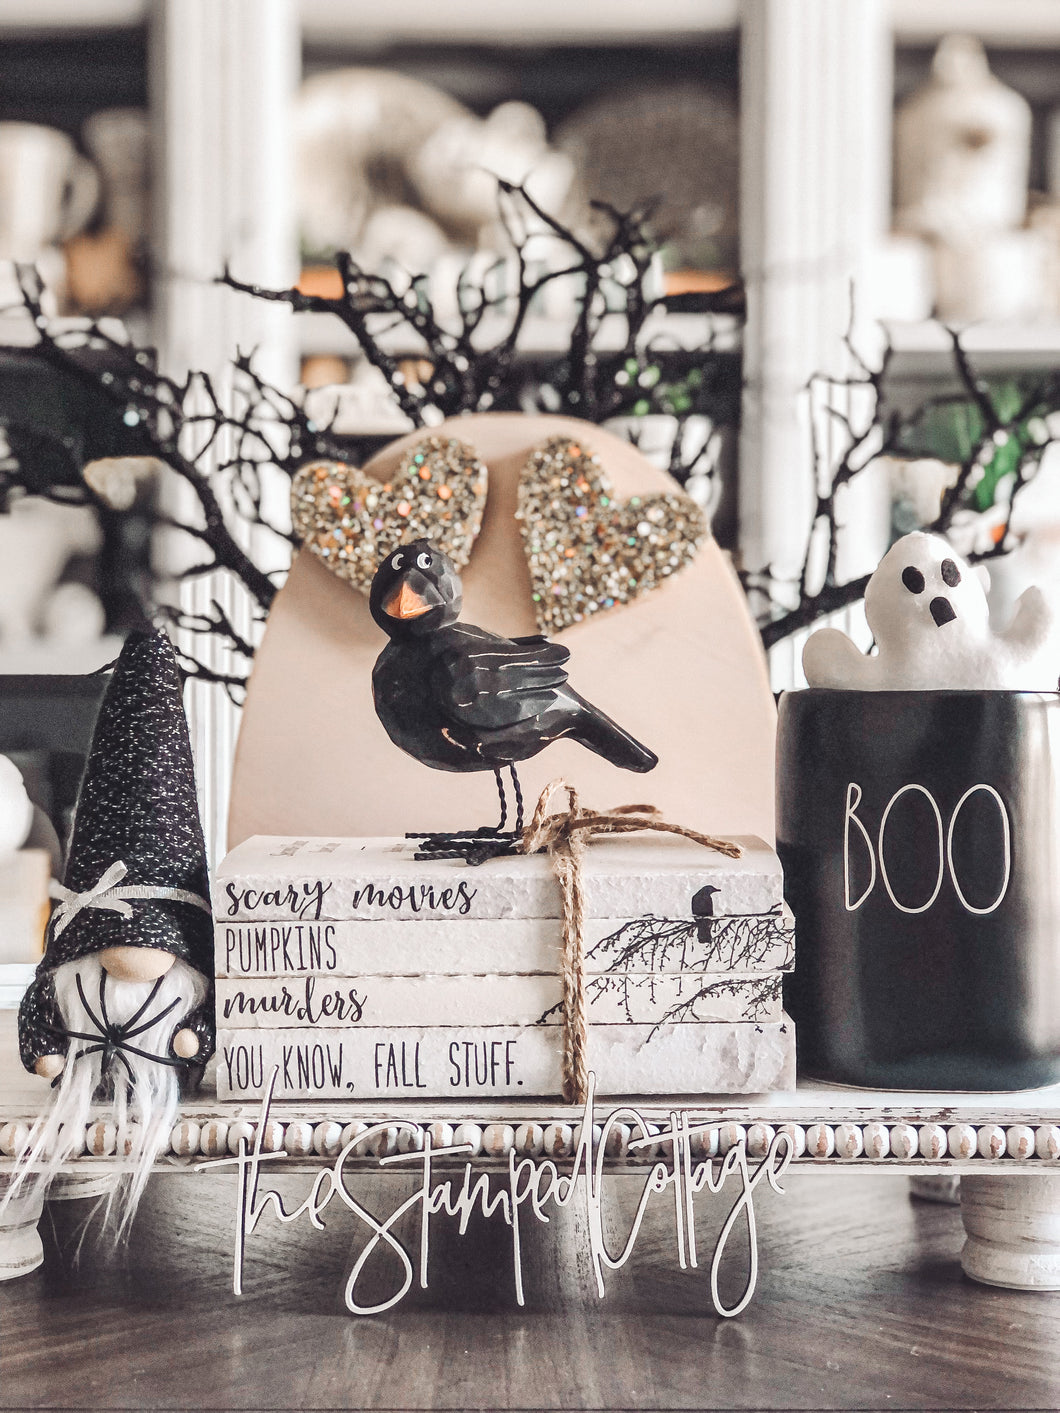 Stamped Book Stack - scary movies, pumpkins, murders, you know fall stuff - with bird on branch